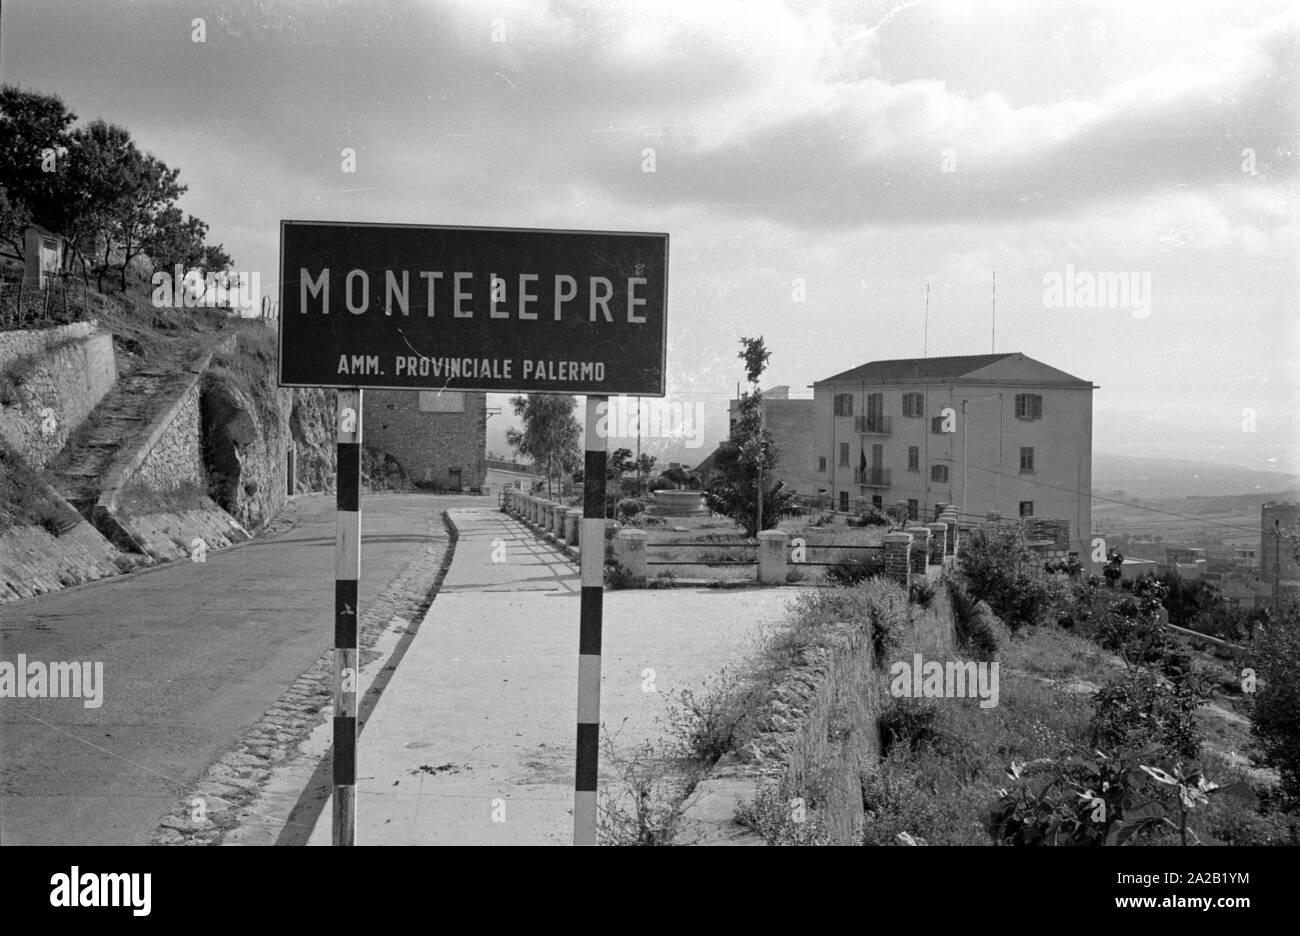 View of the town sign of Montelepre in the province of Palermo (region of Sicily). It is 26km away from the city of Palermo. Former Sicilian folk hero Salvatore Giuliano was born in Montelepre in 1922, and he is buried in the Ostfriedhof (Eastern cemetery) of the city. The inhabitants of Montelepre make a living mainly from farming. Stock Photo